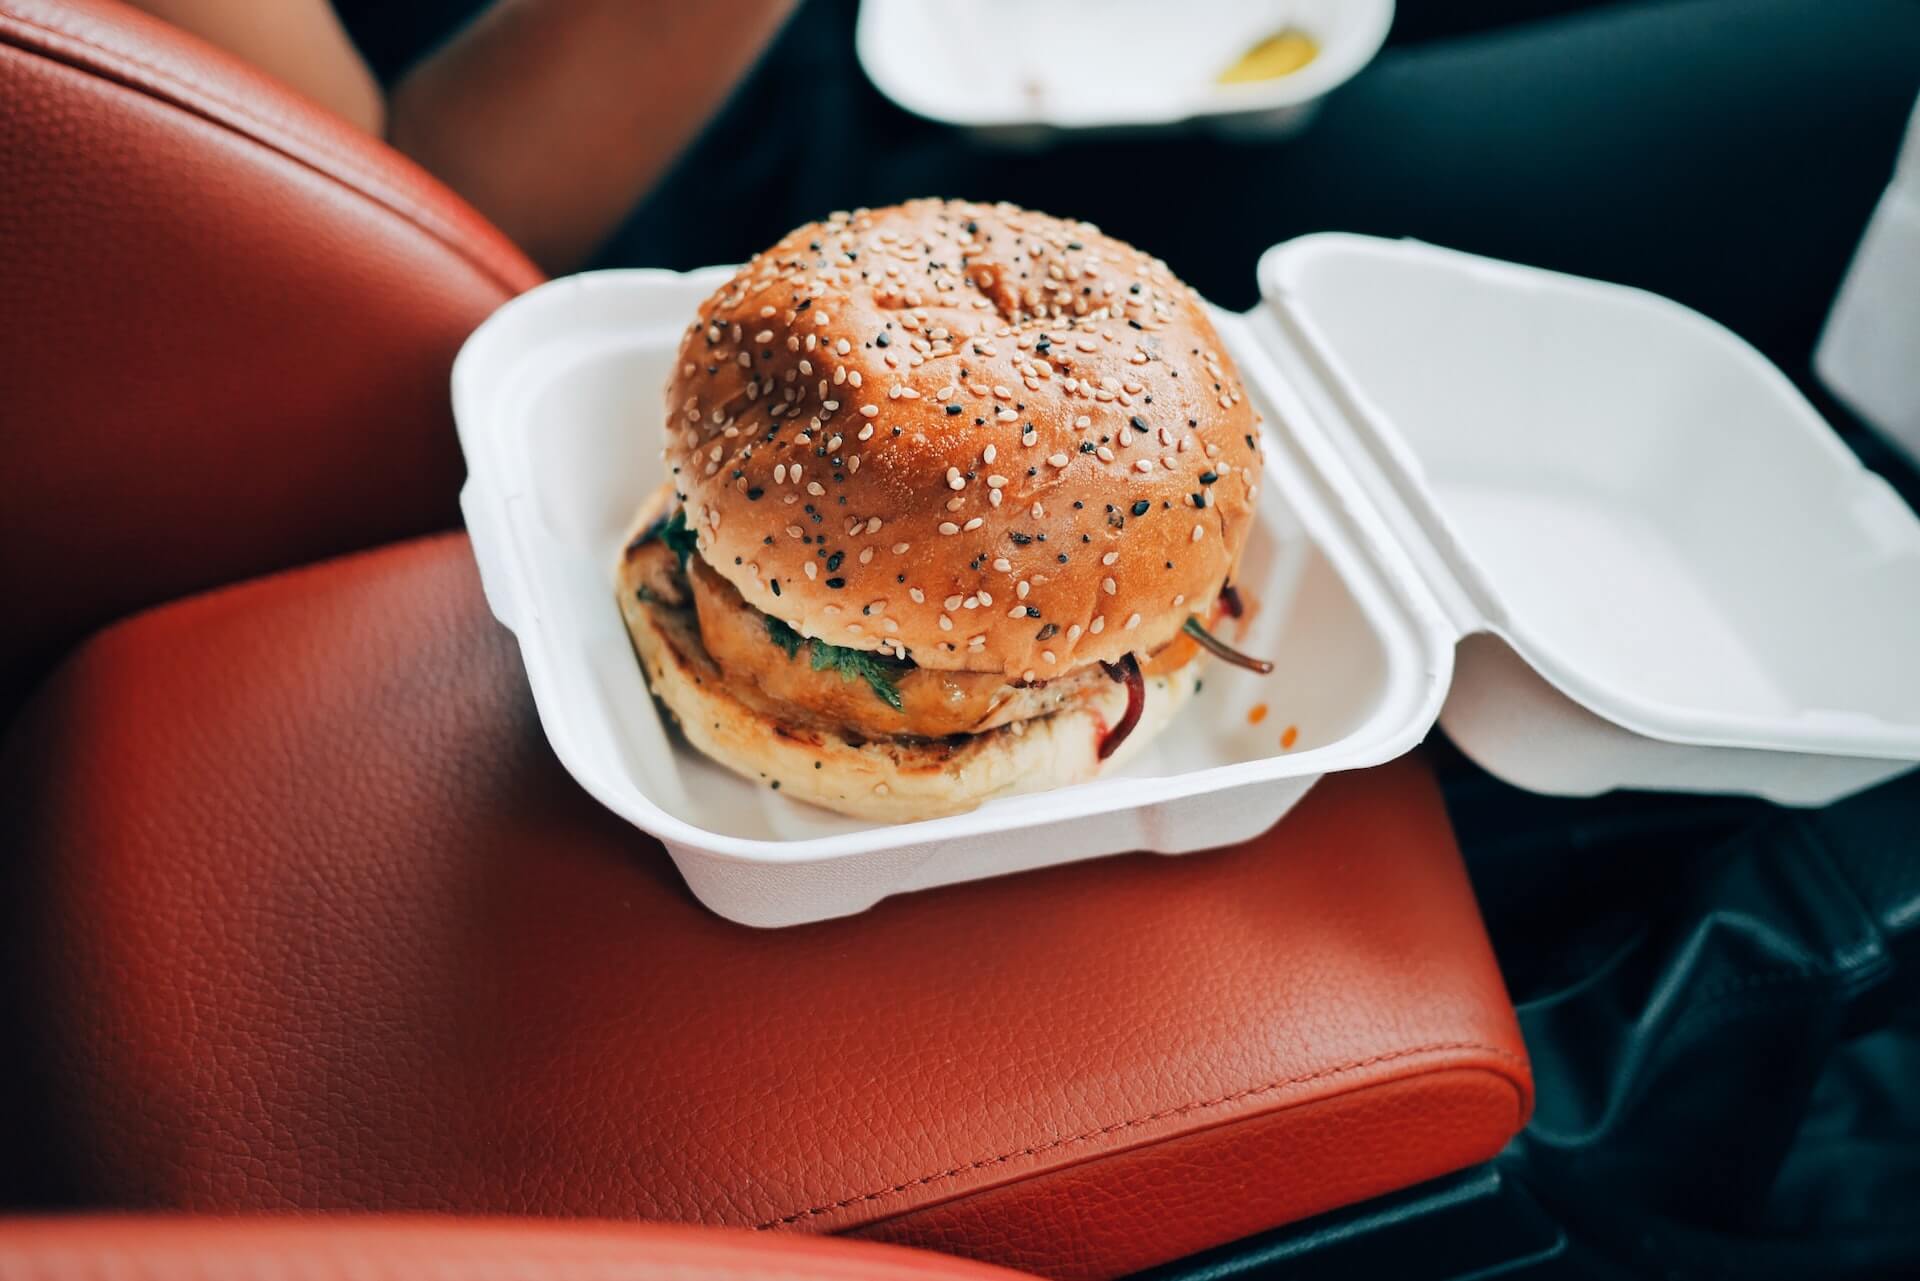 Burger in container inside car